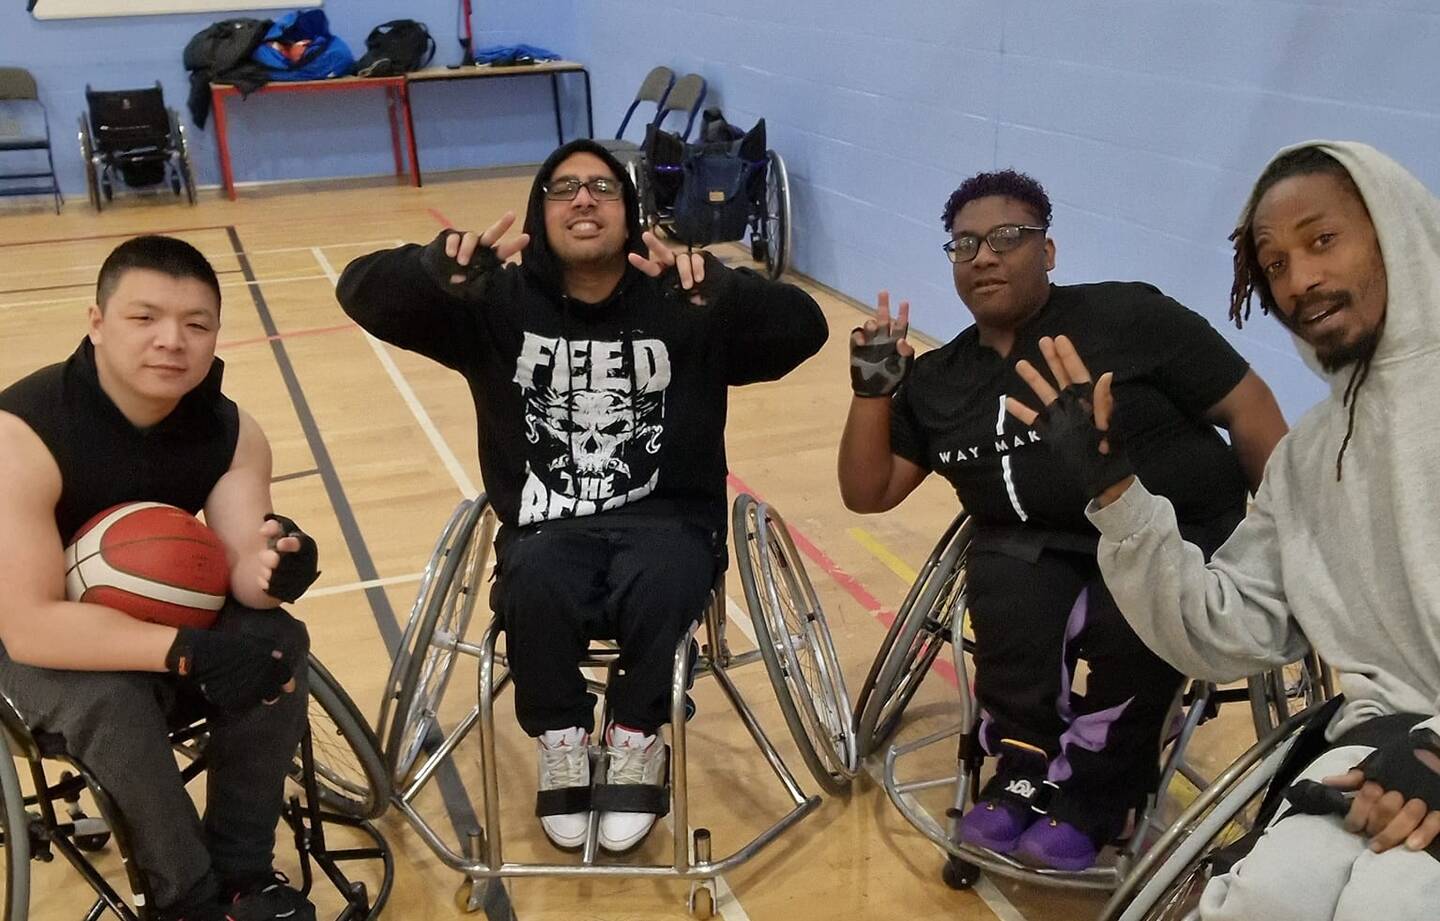 Group of disabled and non-disabled people posing for a picture with a basketball in sports wheelchairs in a sport hall.